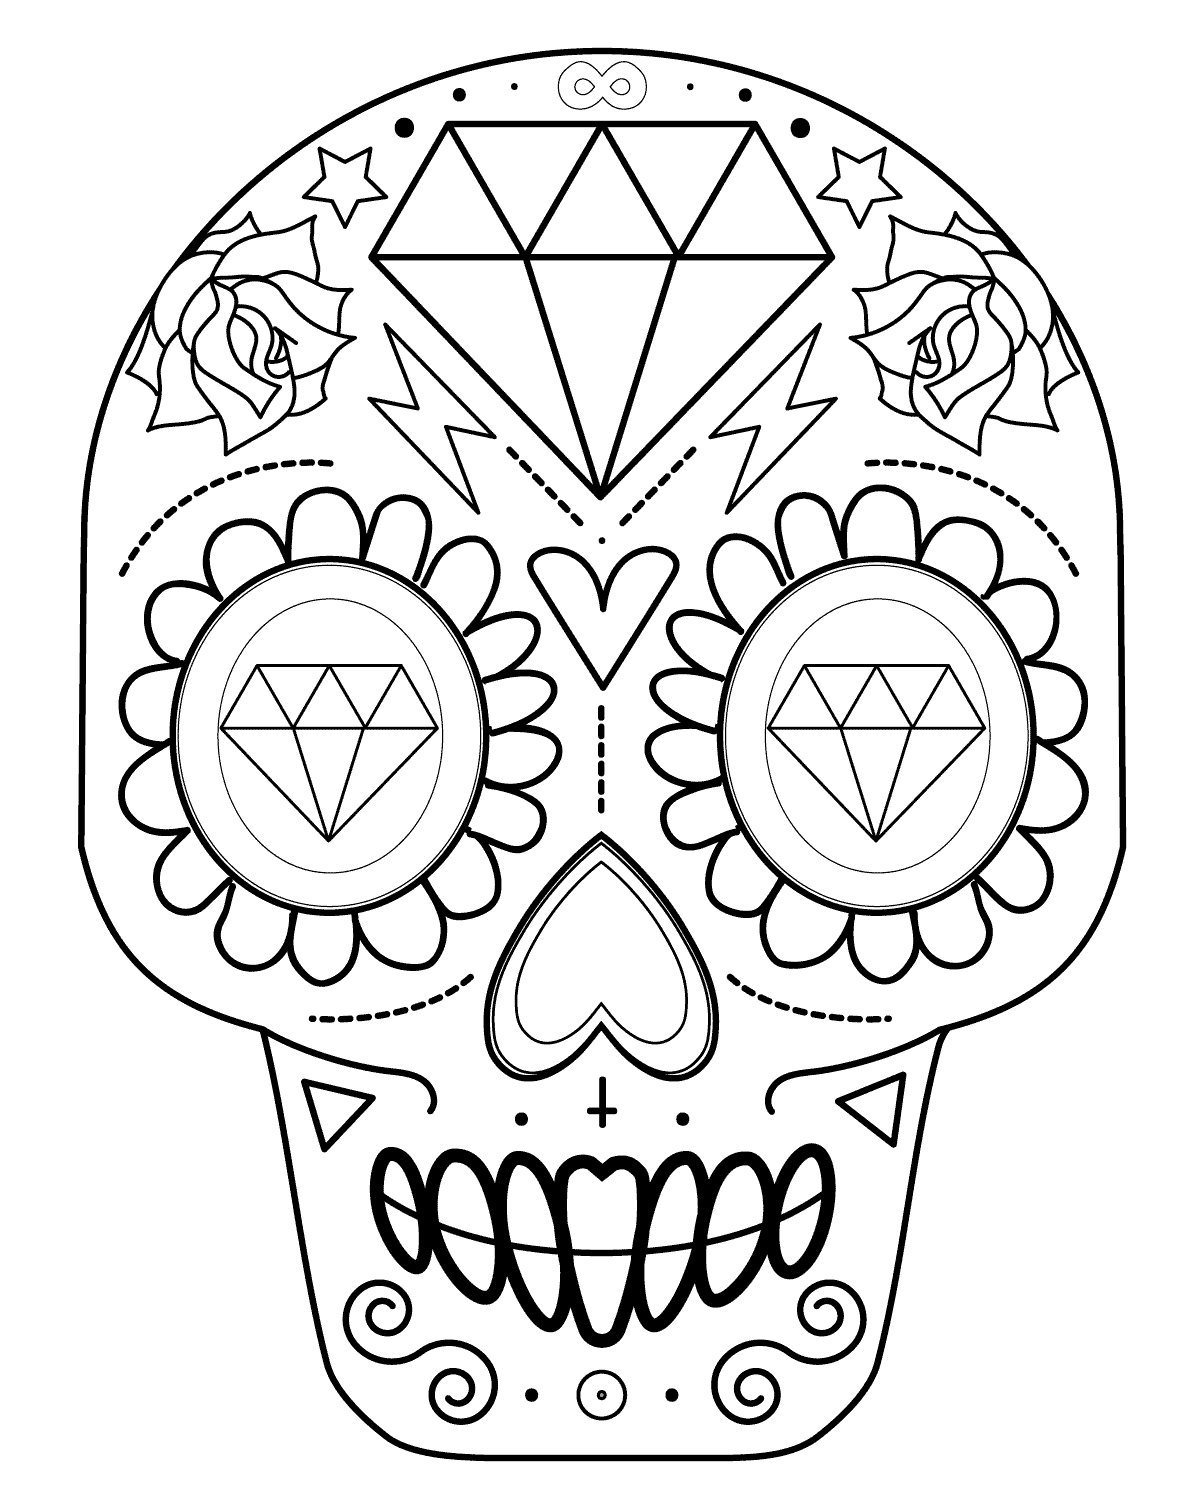 Sugar Skull with Diamonds Coloring Page